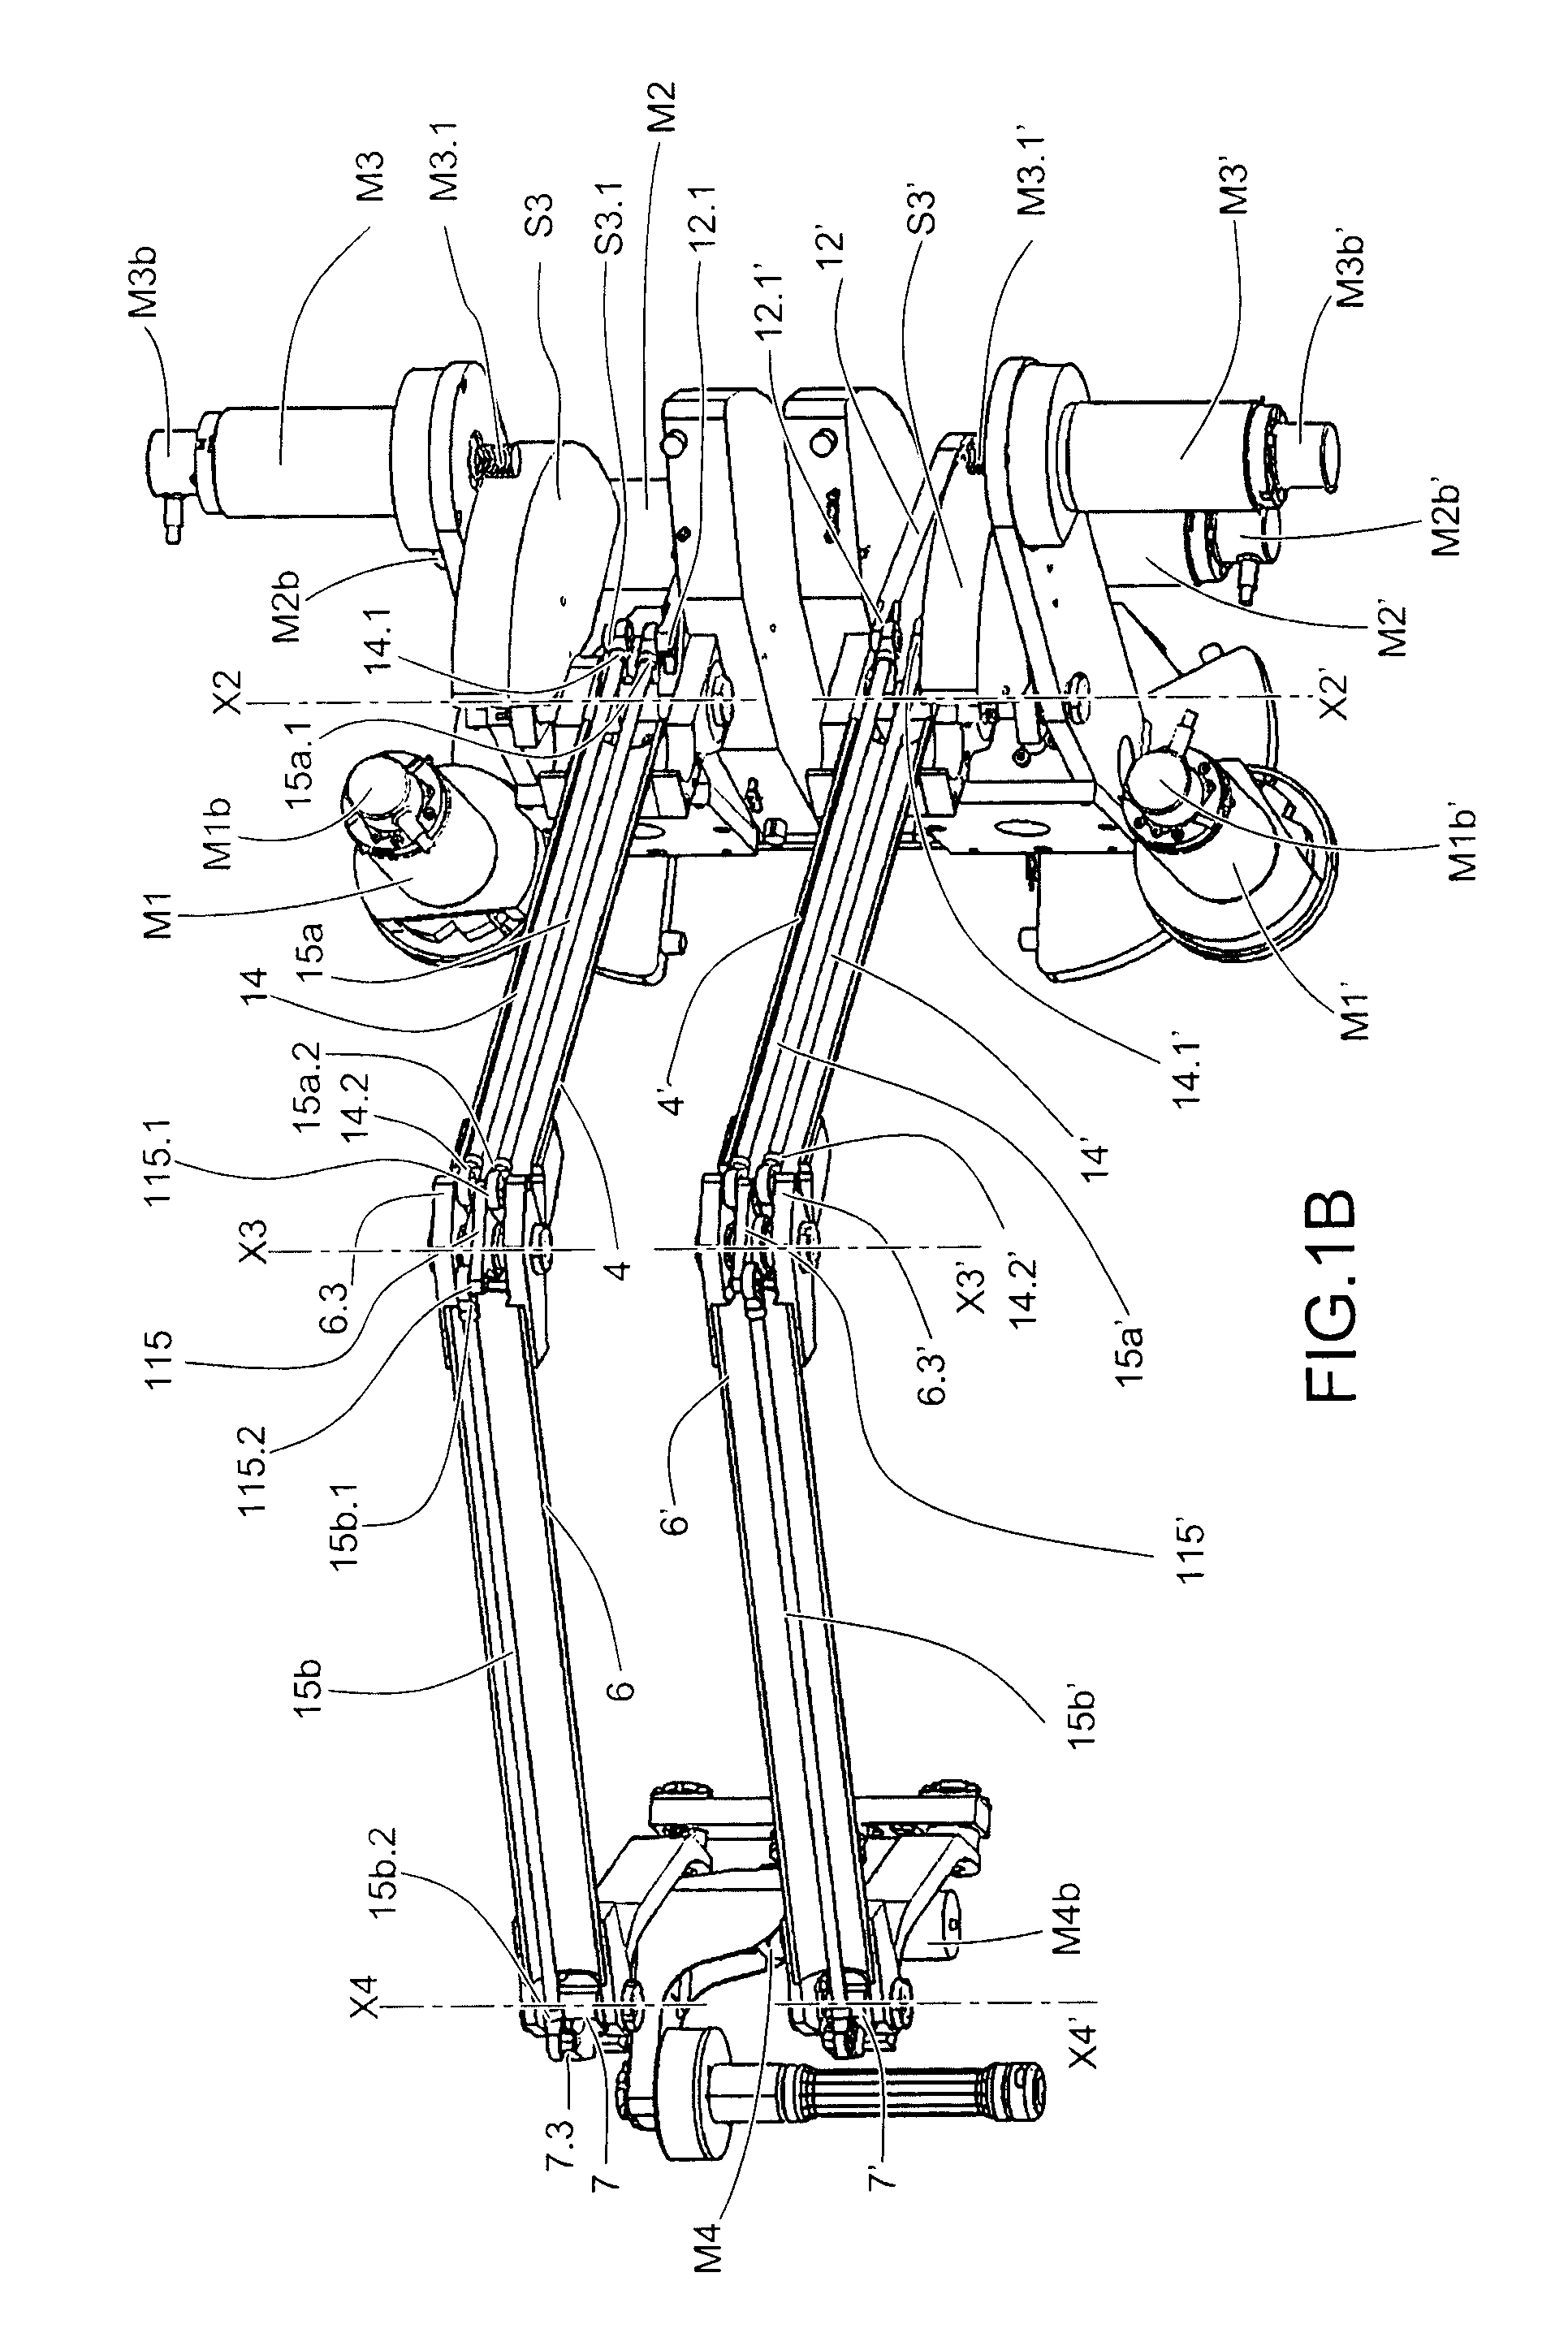 Robot or haptic interface structure with parallel arms